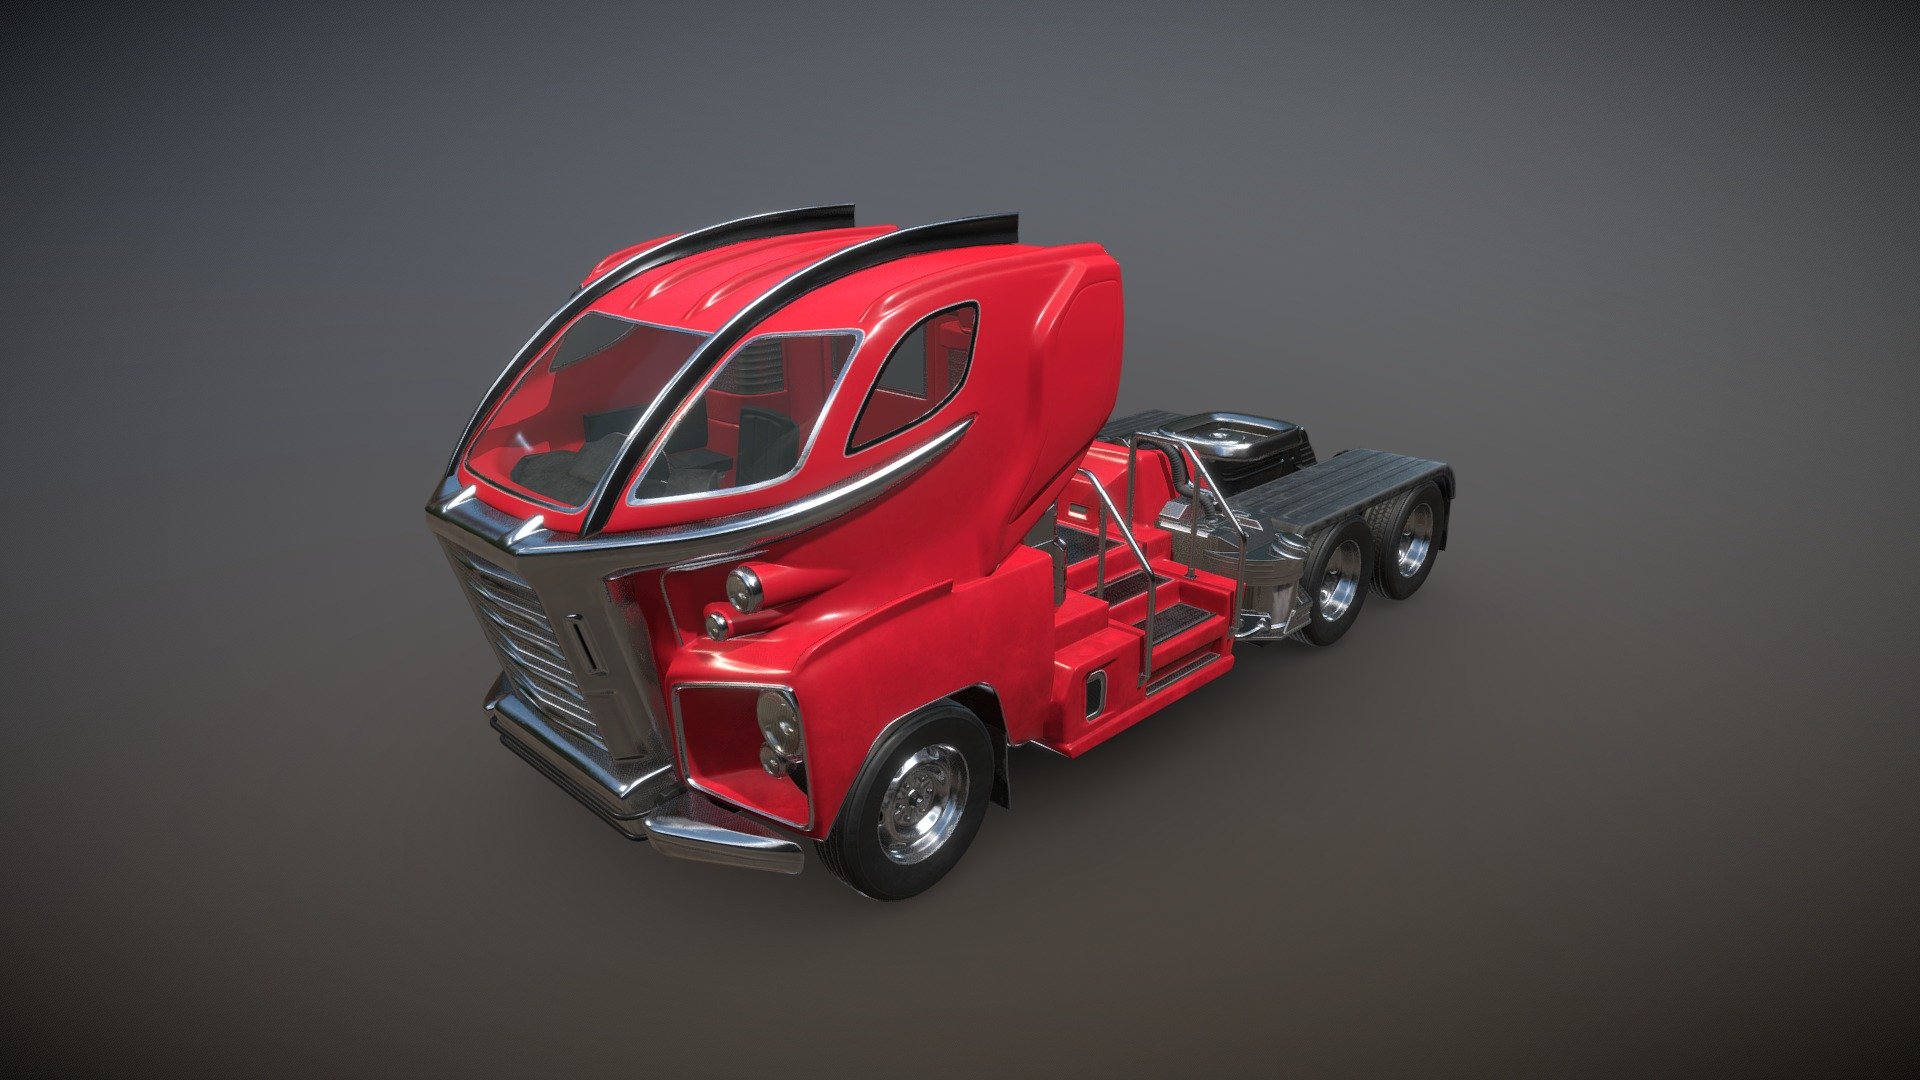 The Leviathan is a Truck / Lorry of Atom-Punk inspiration.

This model has been created using a high-low poly construction method &amp; comes with a PBR Metallic / Roughness texture set.

Originally created for modding purposes.

See more of my artwork on my ArtStation:

https://www.artstation.com/edgeuk90

(custom colors can be made on request)

Notice: Incorrect download / ripping of this content will result in a DMCA being filed against you 3d model